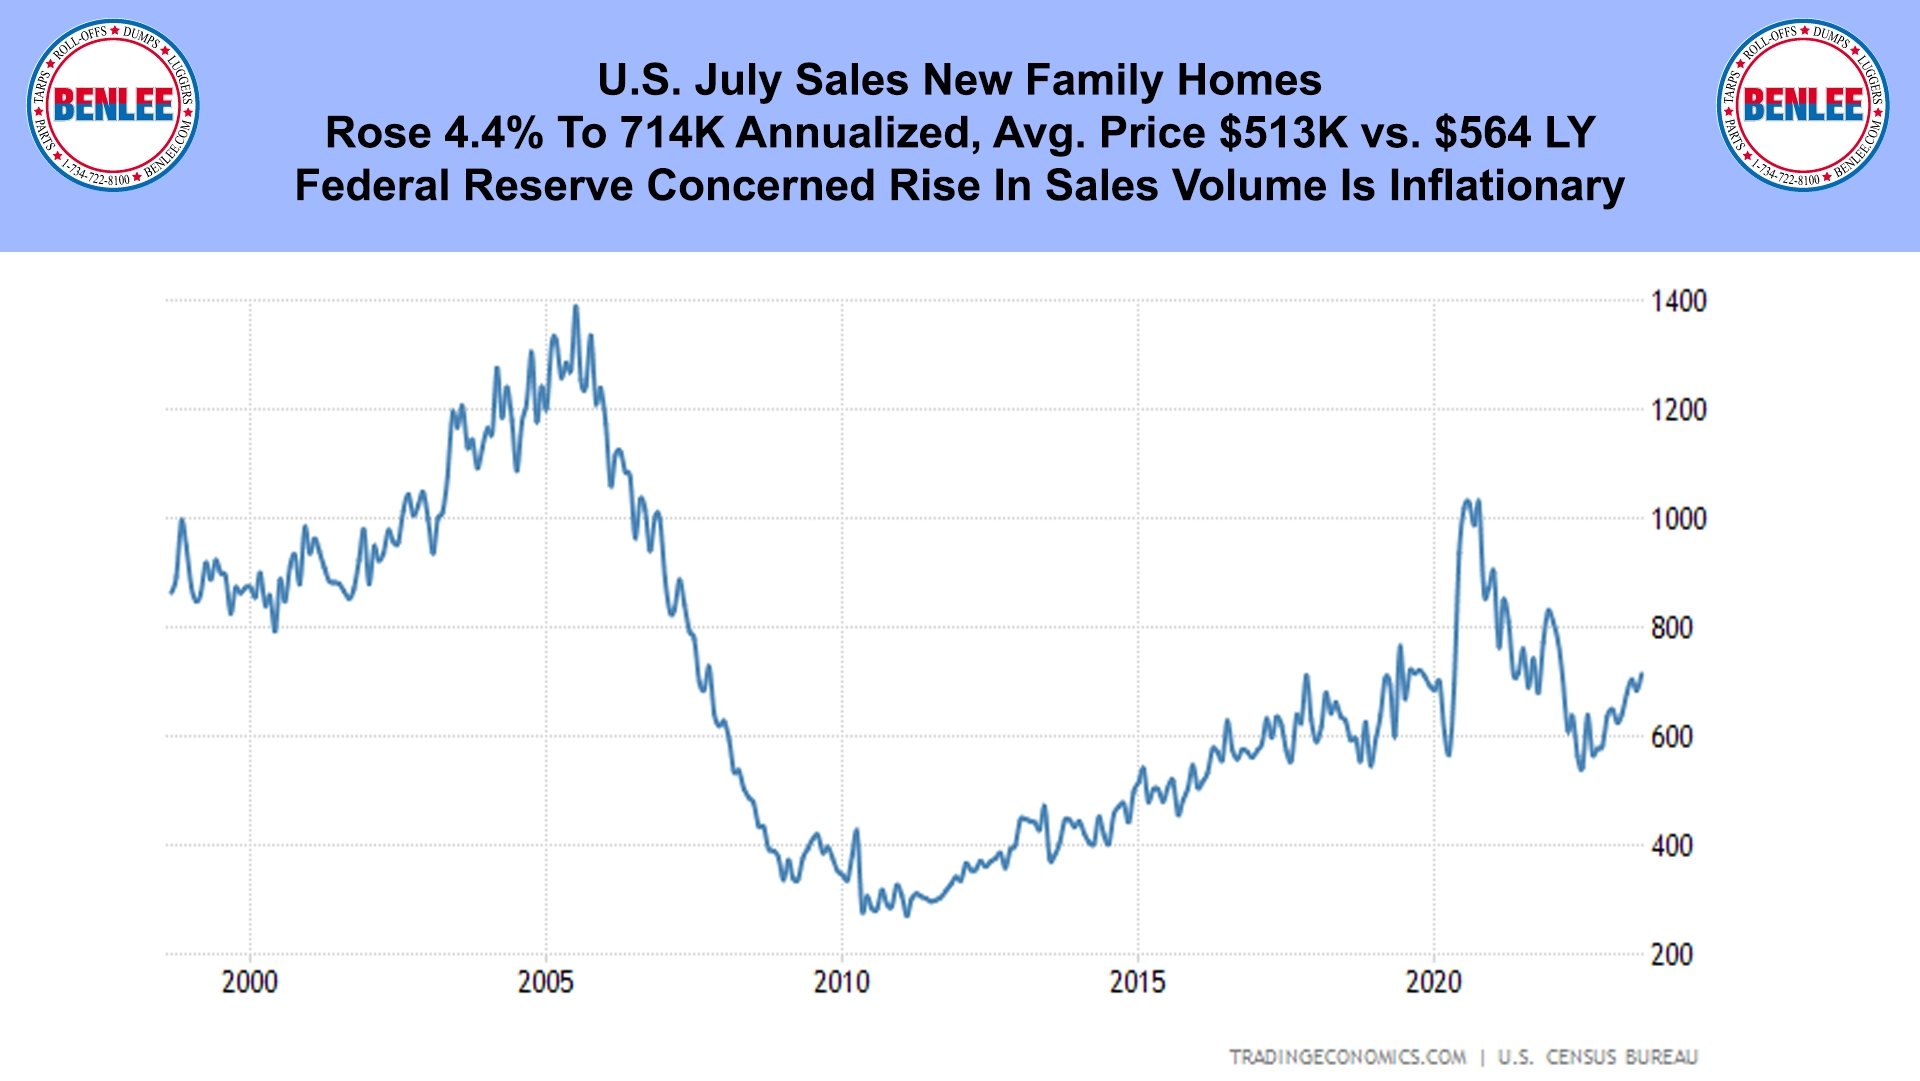 U.S. July Sales New Family Homes